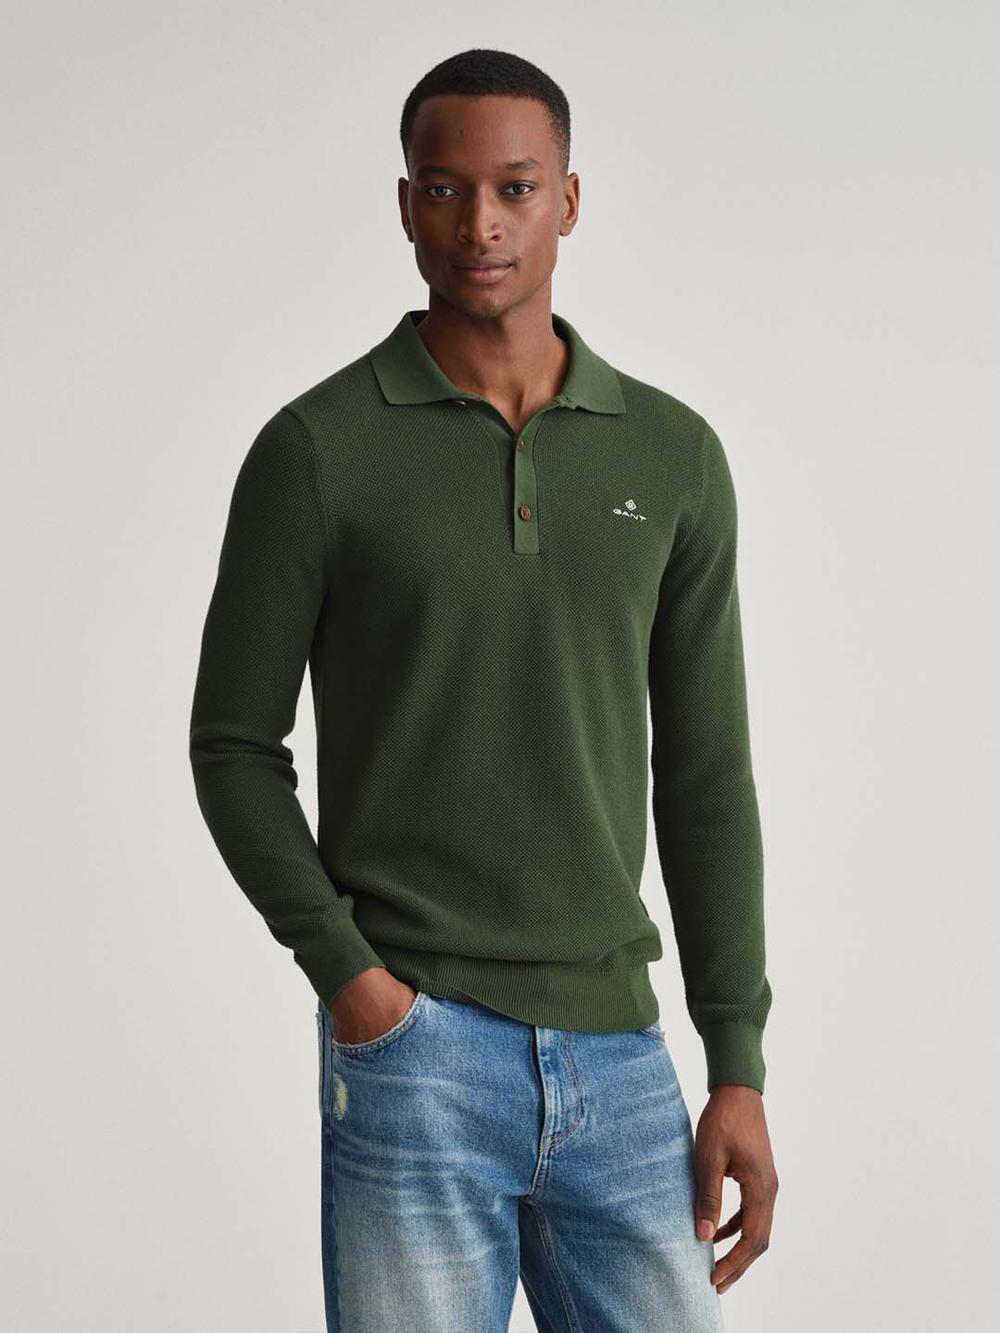 green-solid-collar-sweater